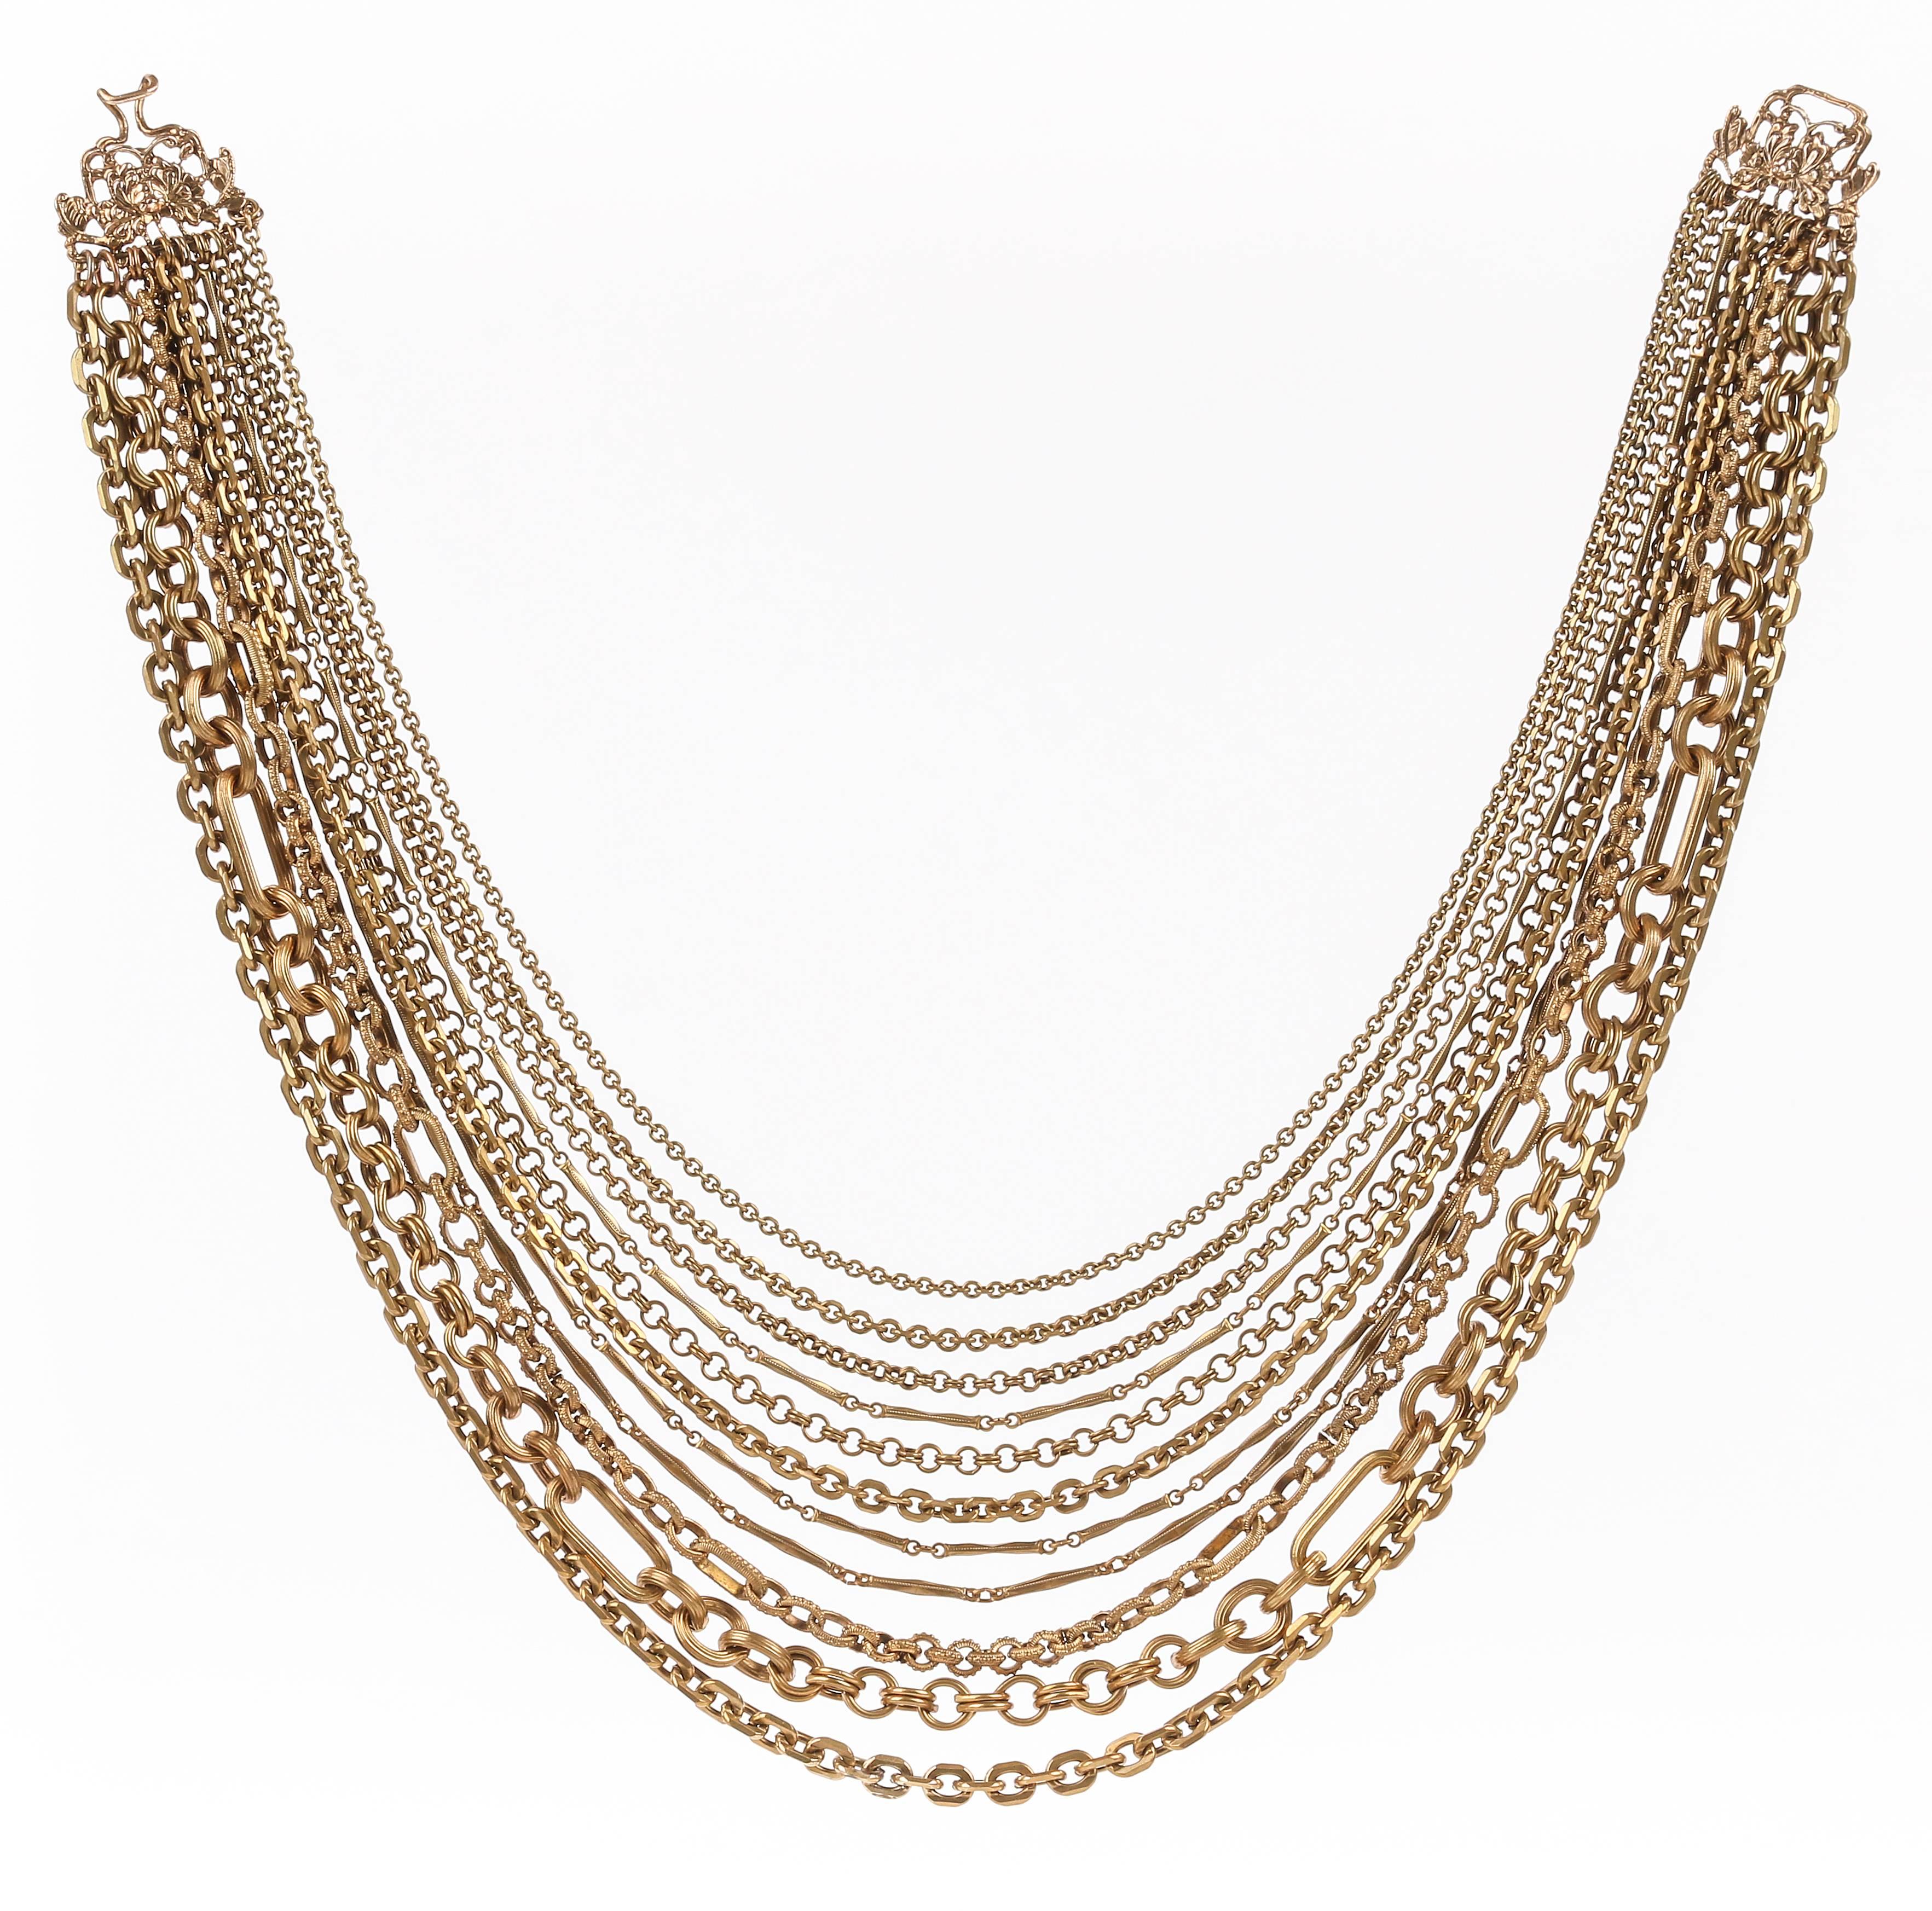 Stephen Dweck bronze multi-strand chain necklace. Eleven strands of varying sizes and styles of cable, double cable, bar, and figaro cable chains. Strands are connected by o-rings to a floral open work hook and bar clasp. Marked "Stephen